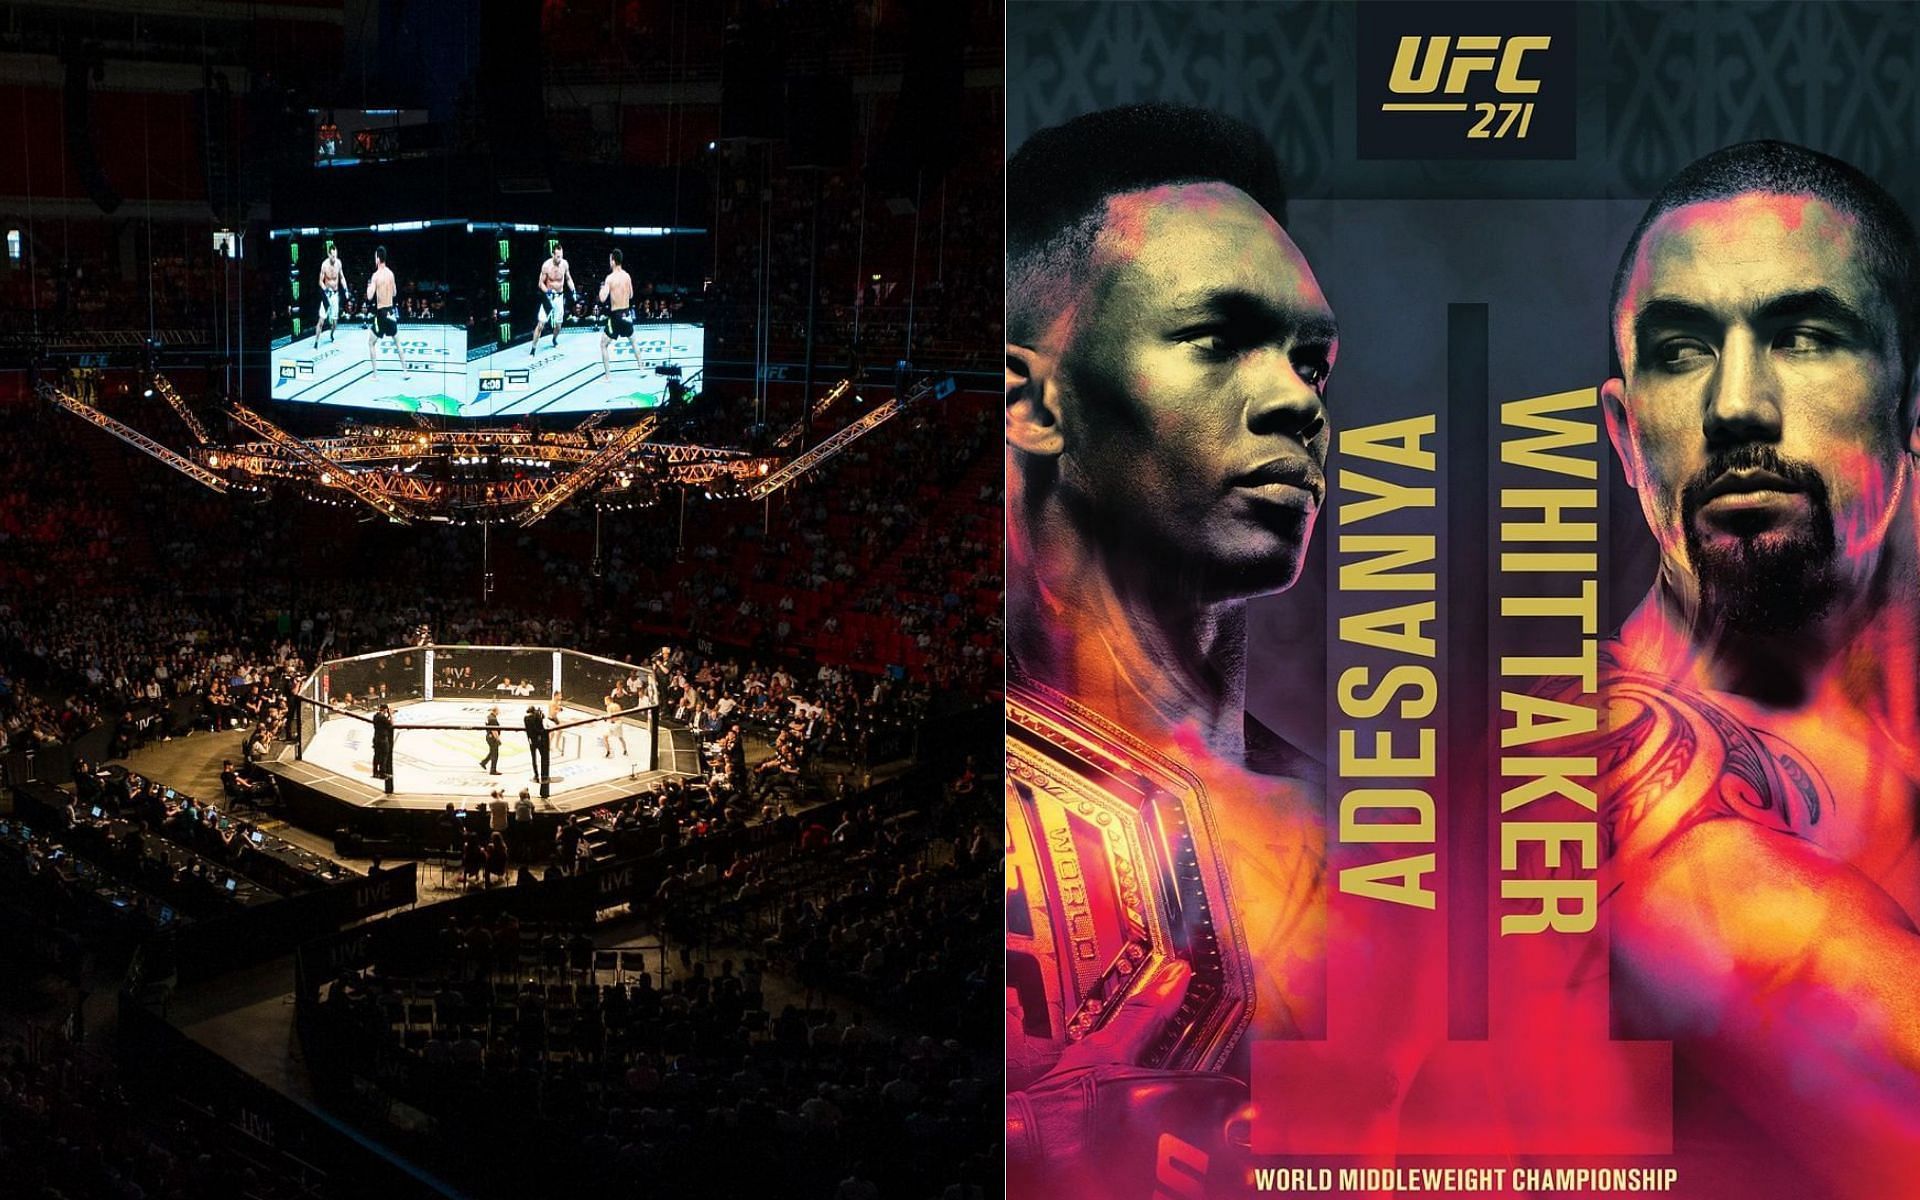 UFC 271 will take place on February 12